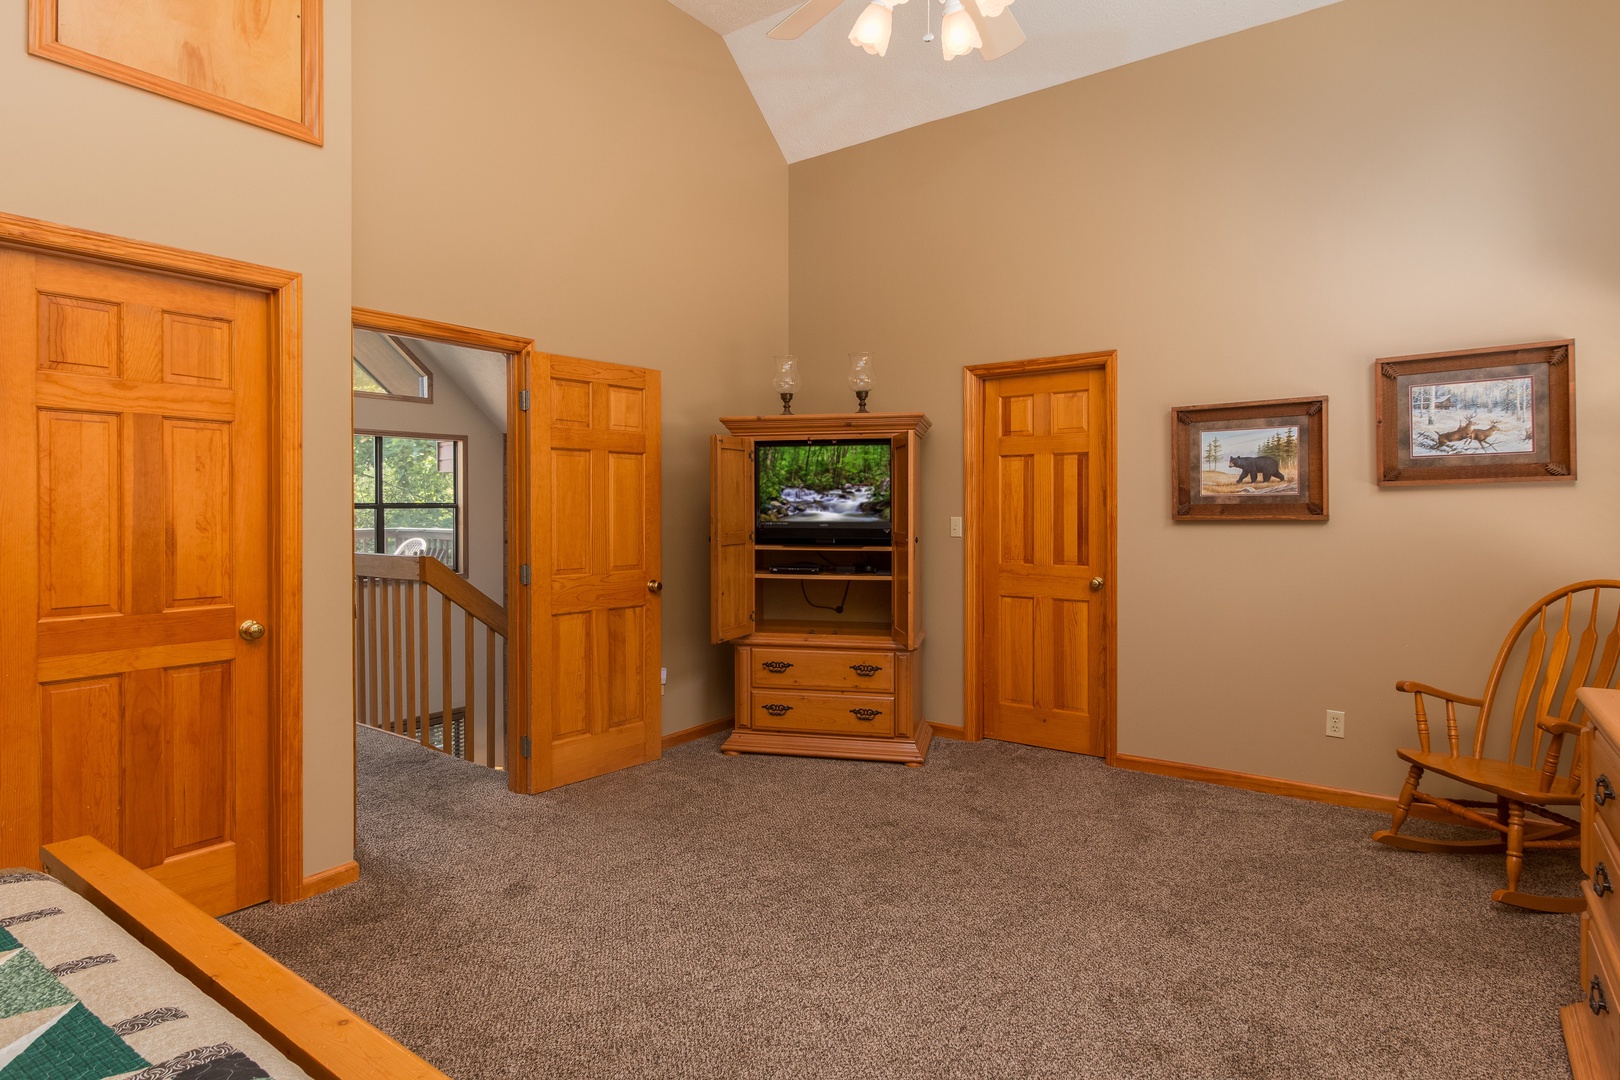 TV in the bedroom at Stones Throw, a 4 bedroom cabin rental located in Pigeon Forge